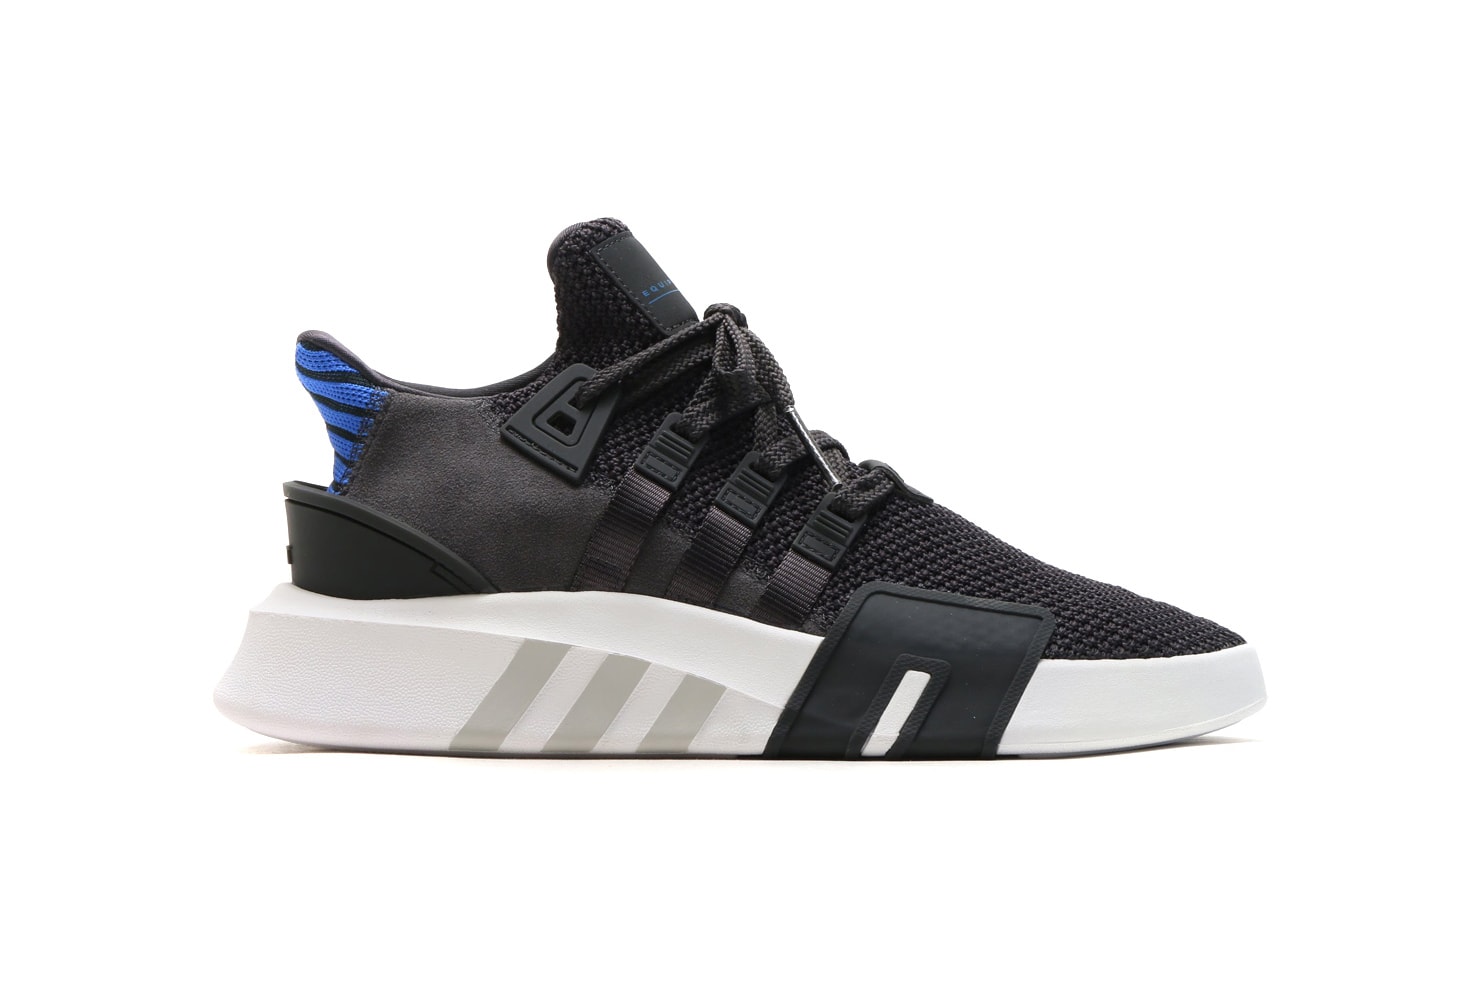 adidas Originals EQT BBall ADV Carbon Collegiate Royal Black Blue 2018 January Release date info sneakers shoes footwear atmos